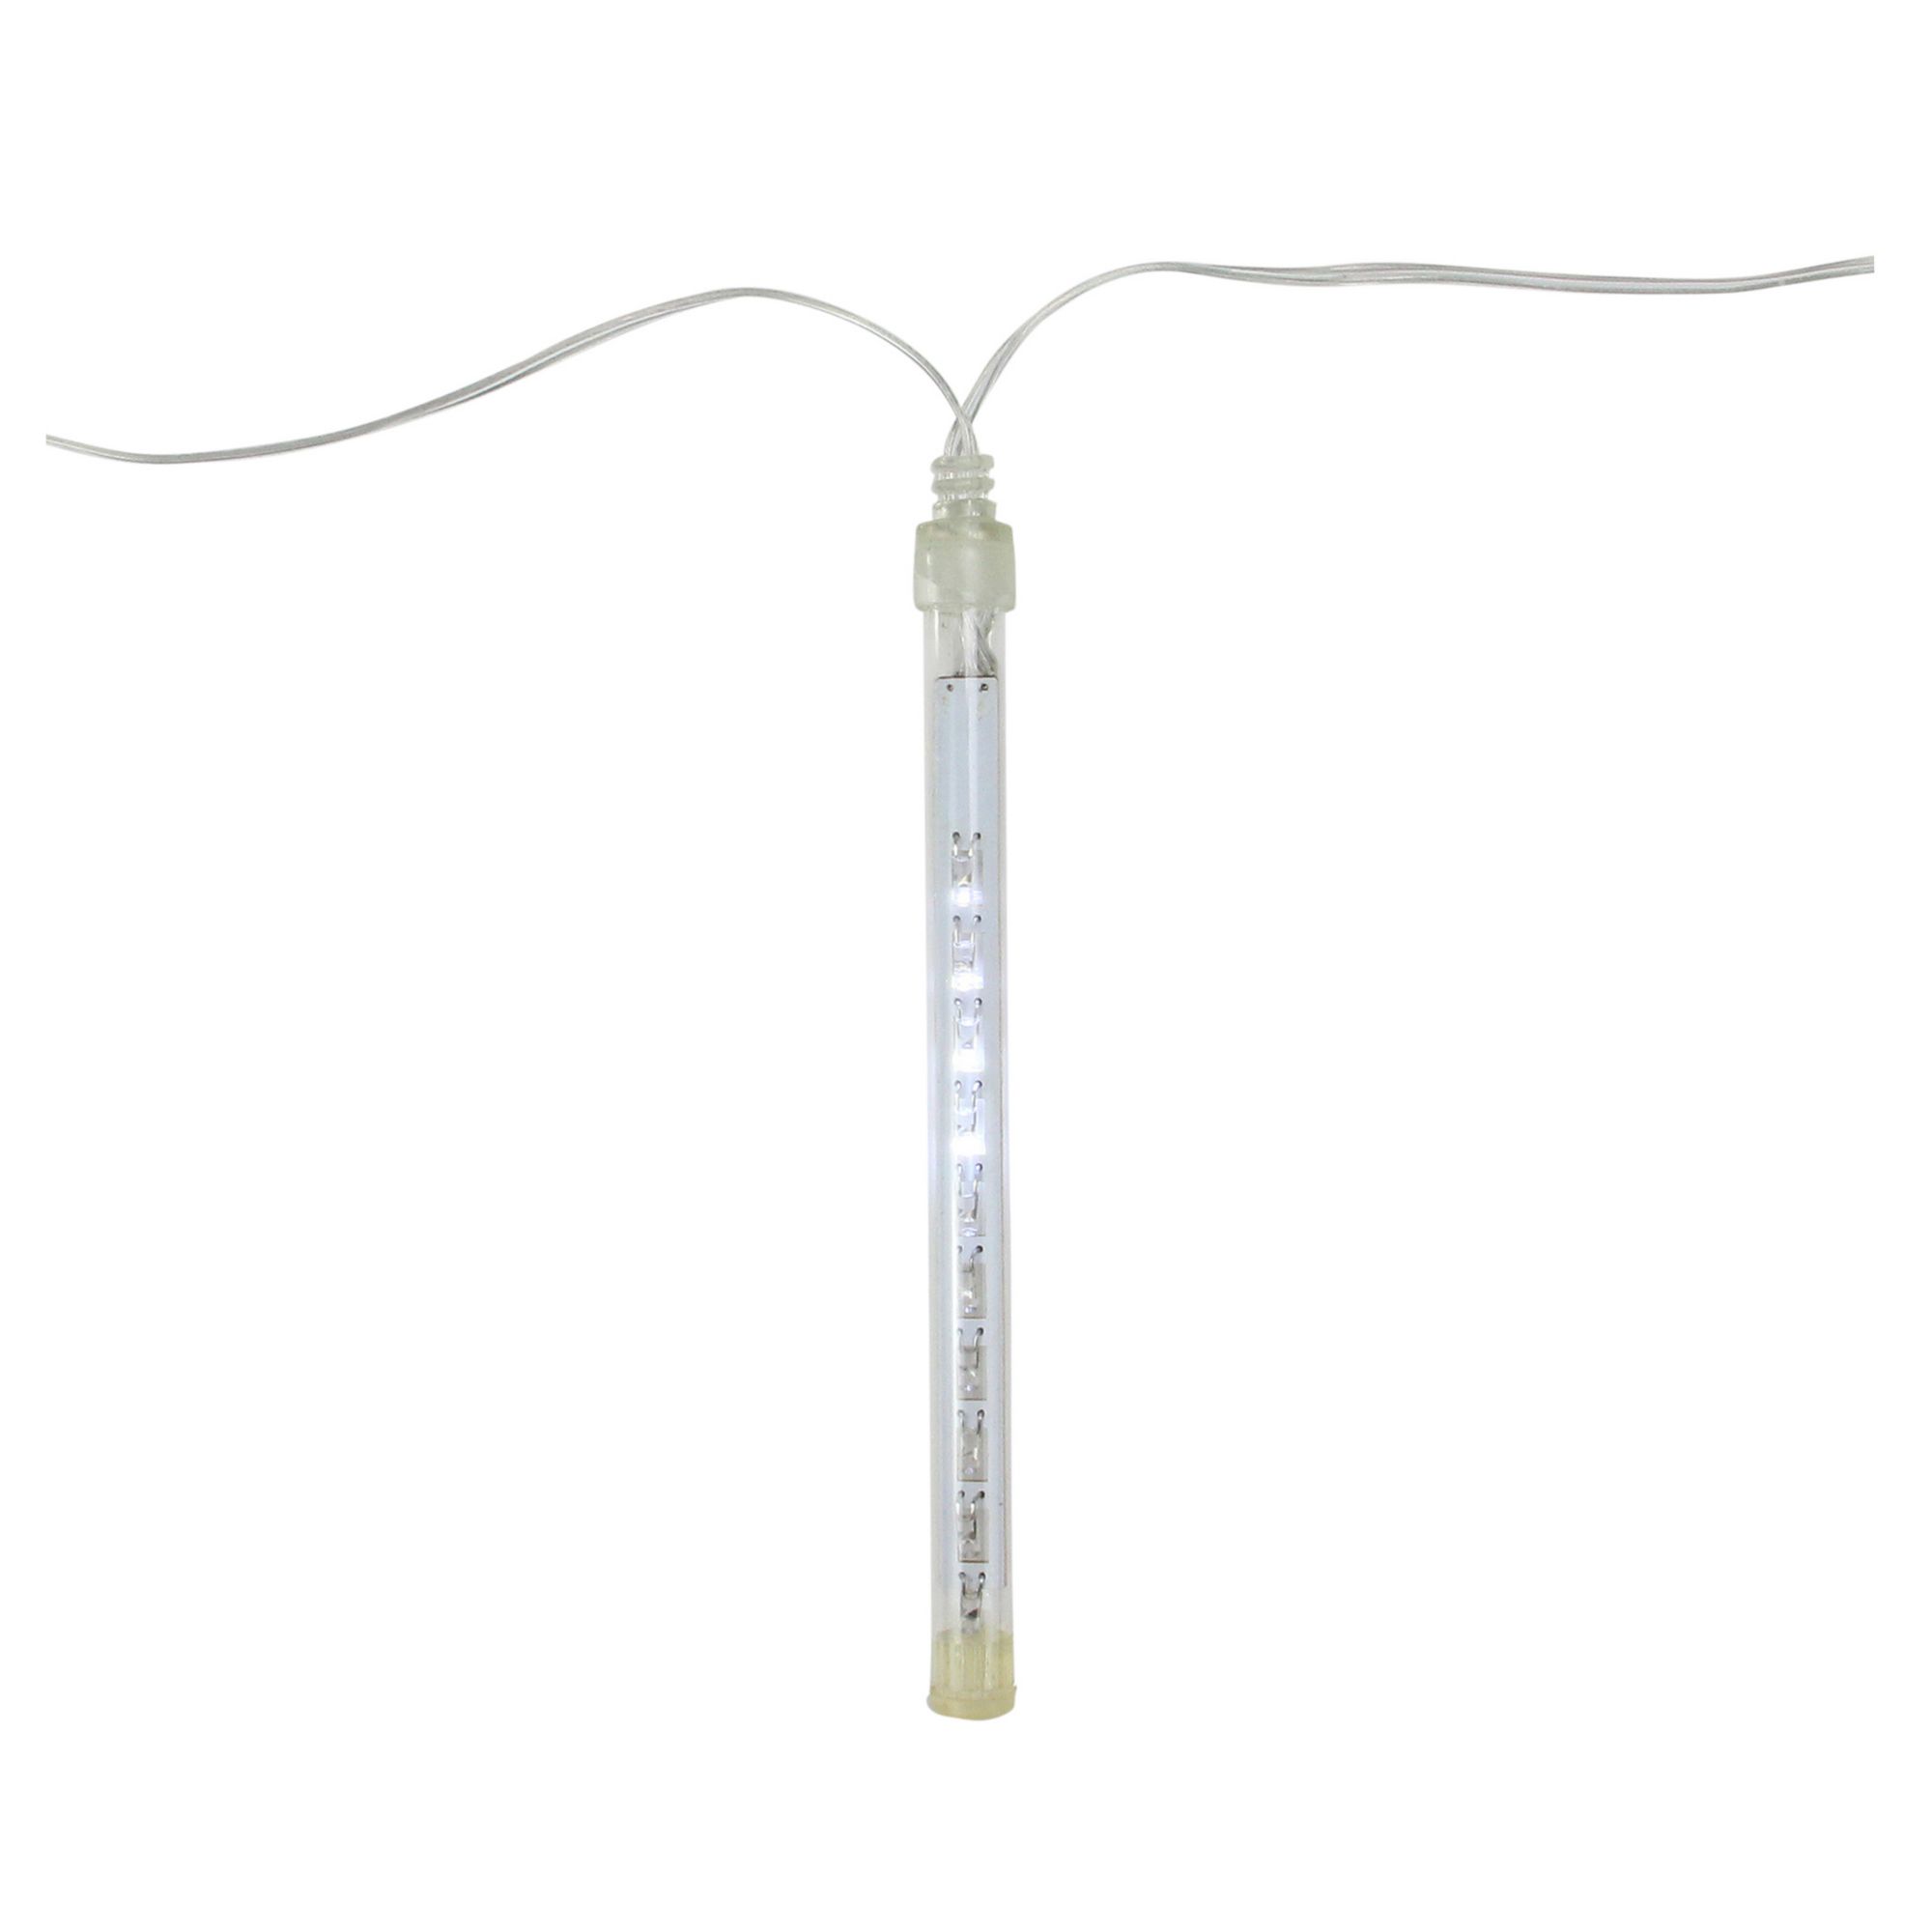 Northlight 14.25' Transparent Dripping Icicle Snowfall Christmas Light Tubes, 10 ct. - White